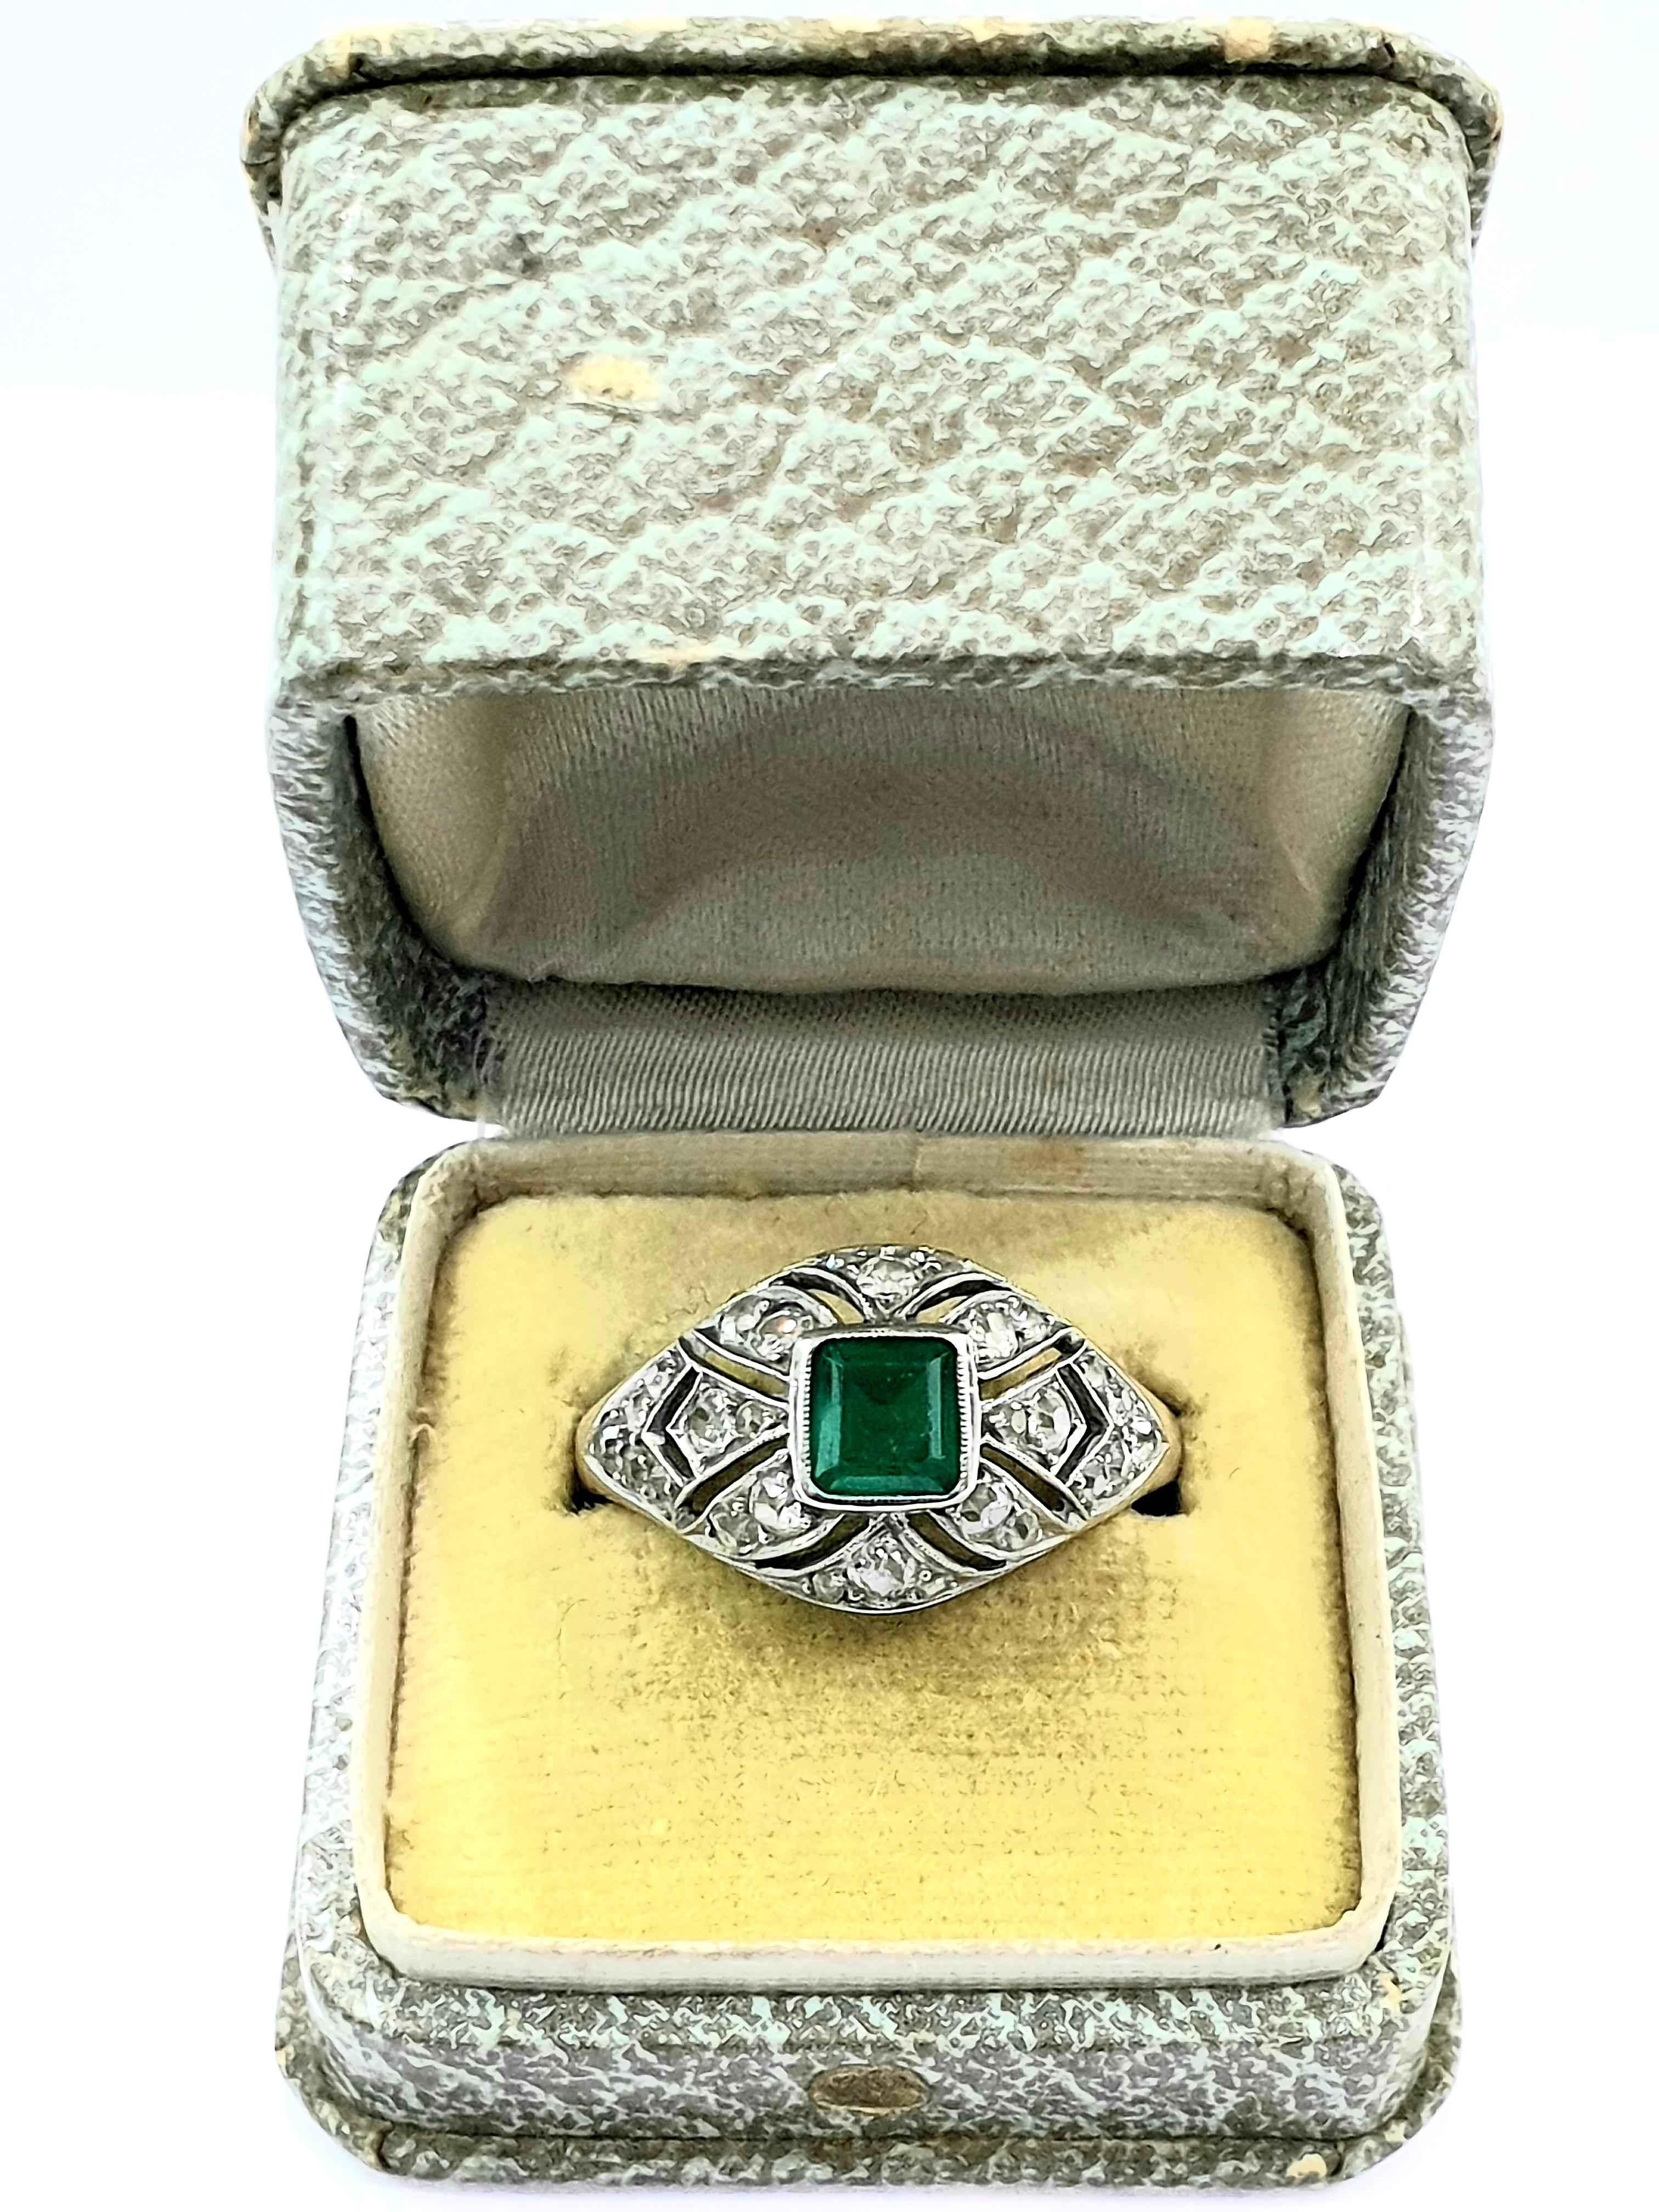 Art Deco Bombe Emerald DIamond ring . The ring is French origin  hallmarked with dog head for platinum. It is from the 1920's time era  and has the original box. Size  8 3/4  US